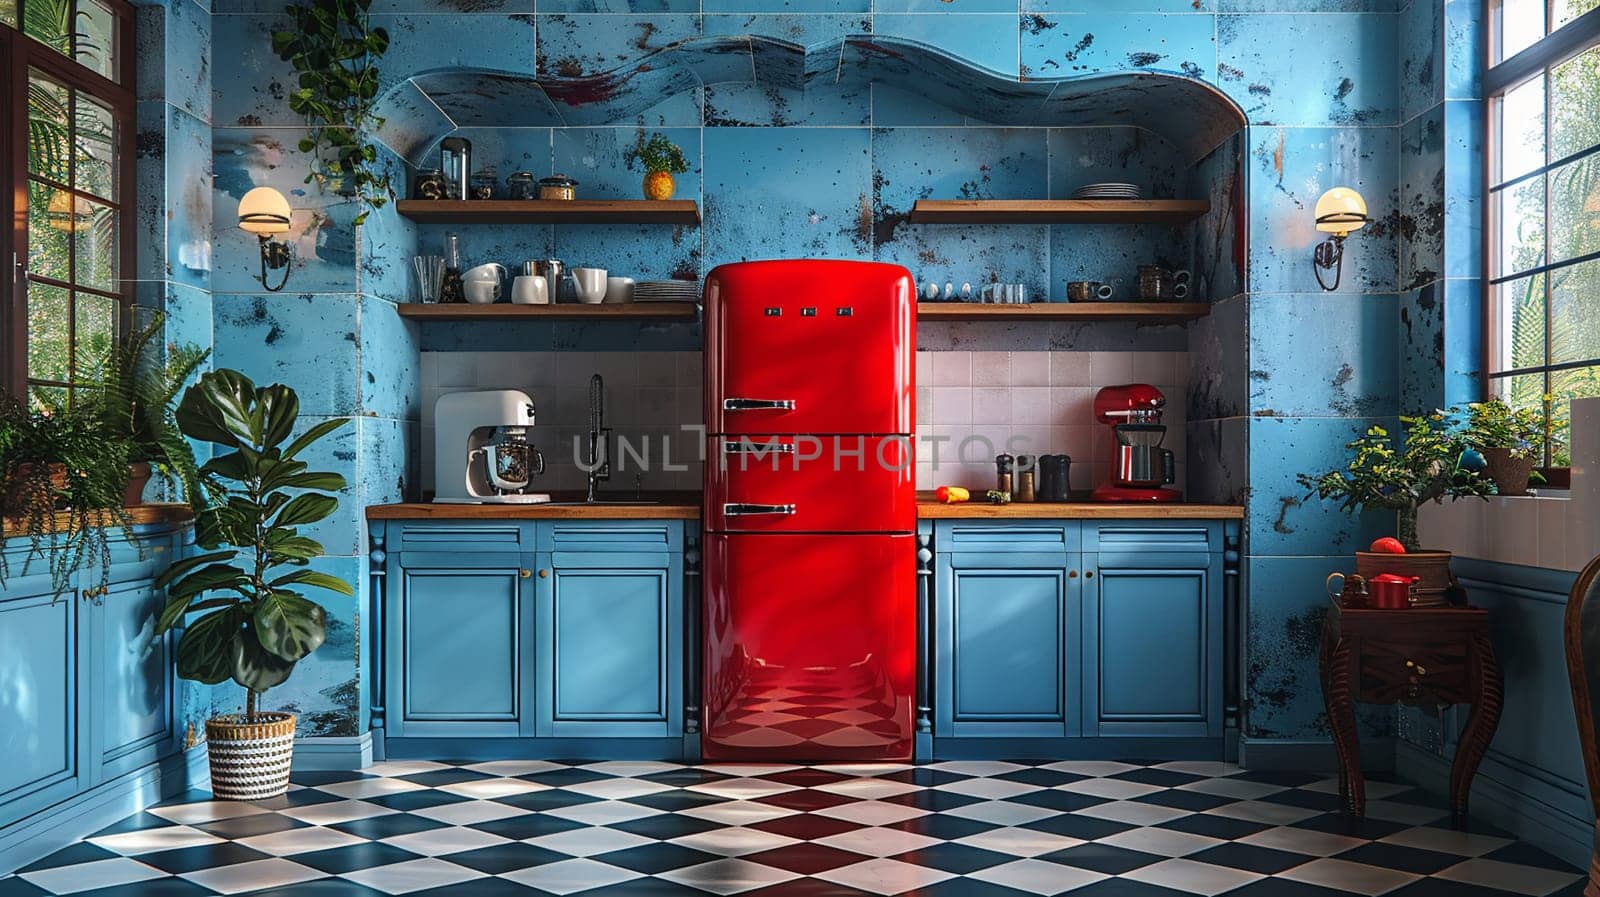 Vintage diner-inspired kitchen with checkered floors and retro appliances by Benzoix